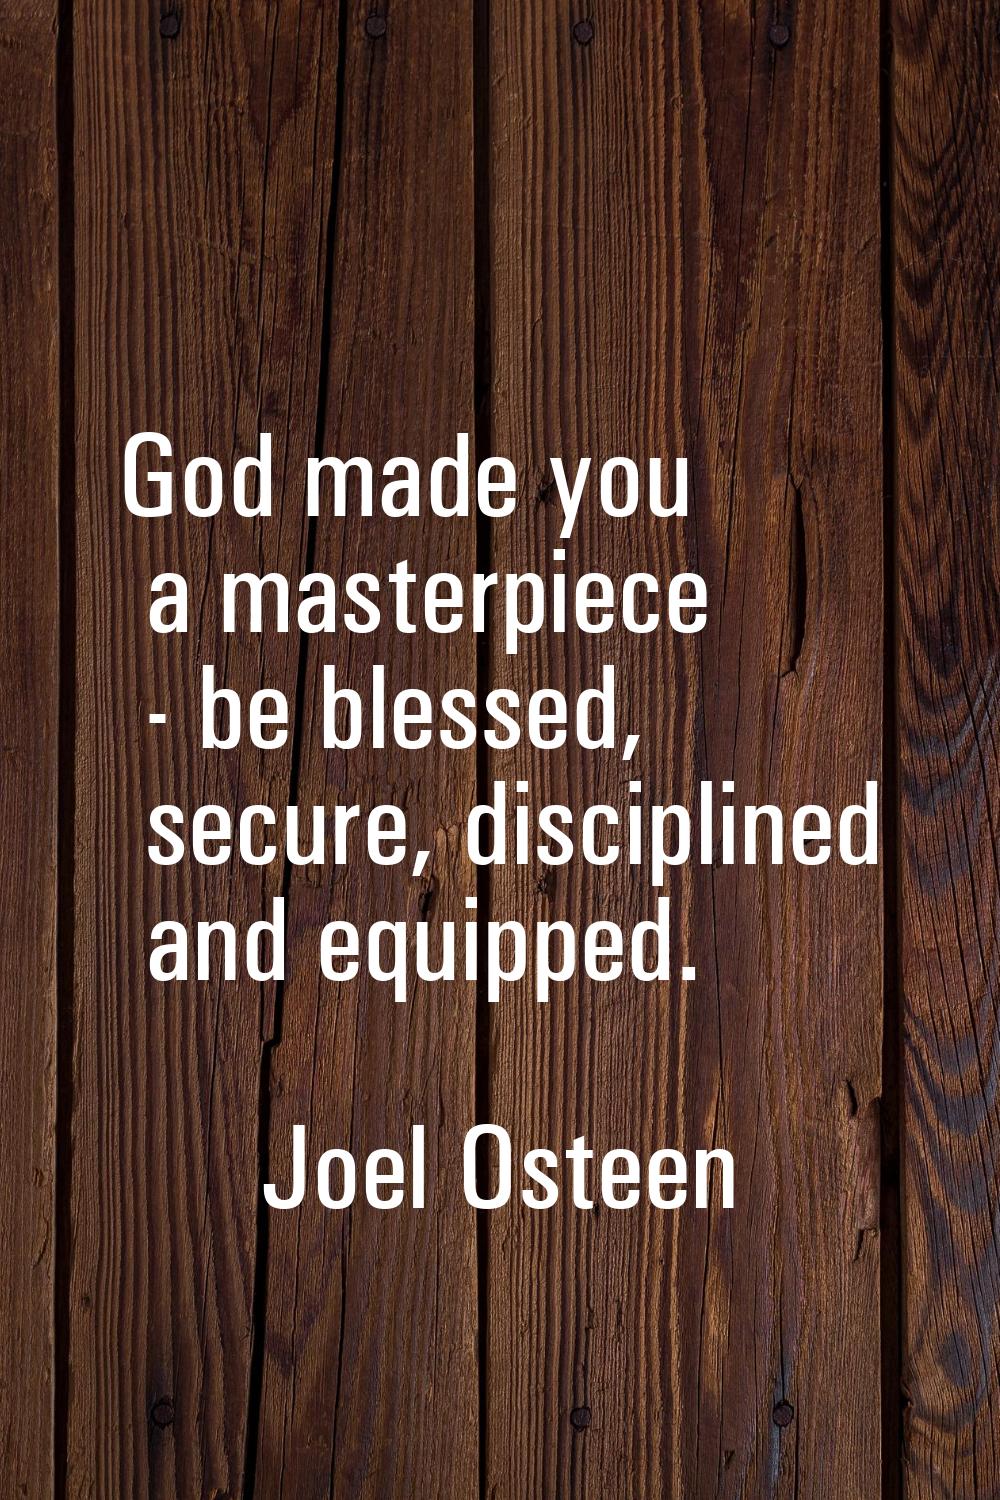 God made you a masterpiece - be blessed, secure, disciplined and equipped.